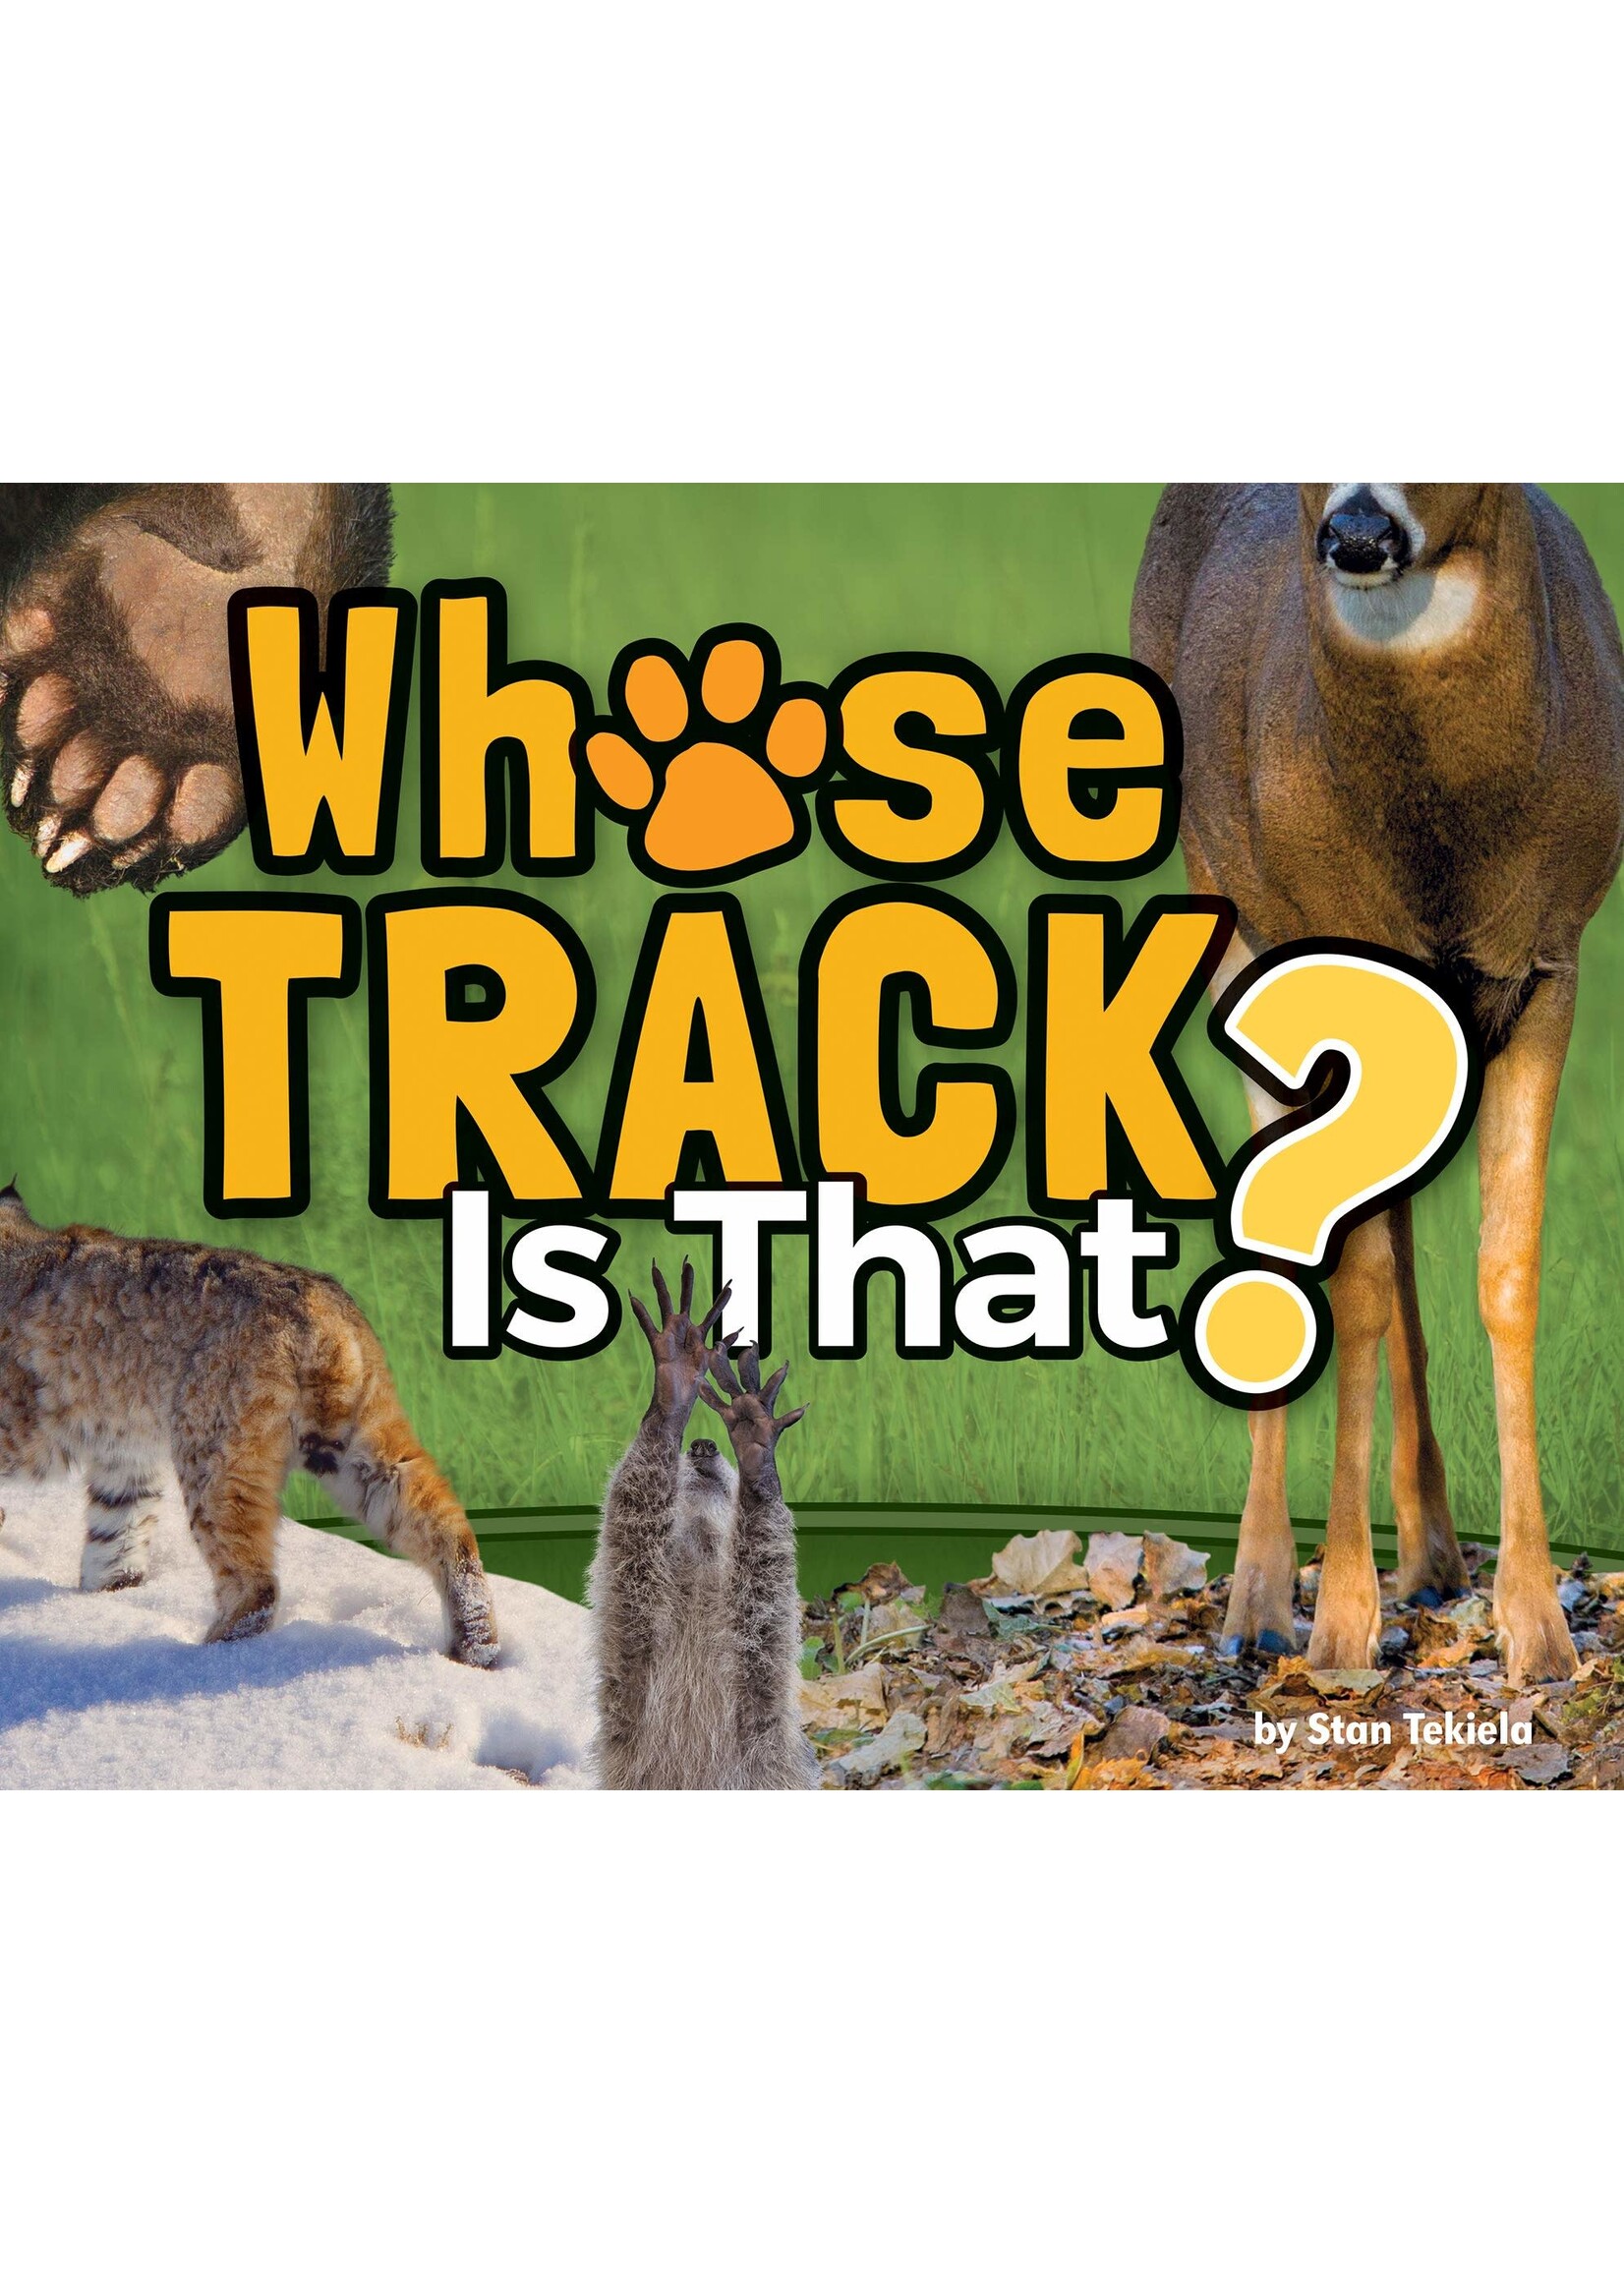 Whose Track is That?